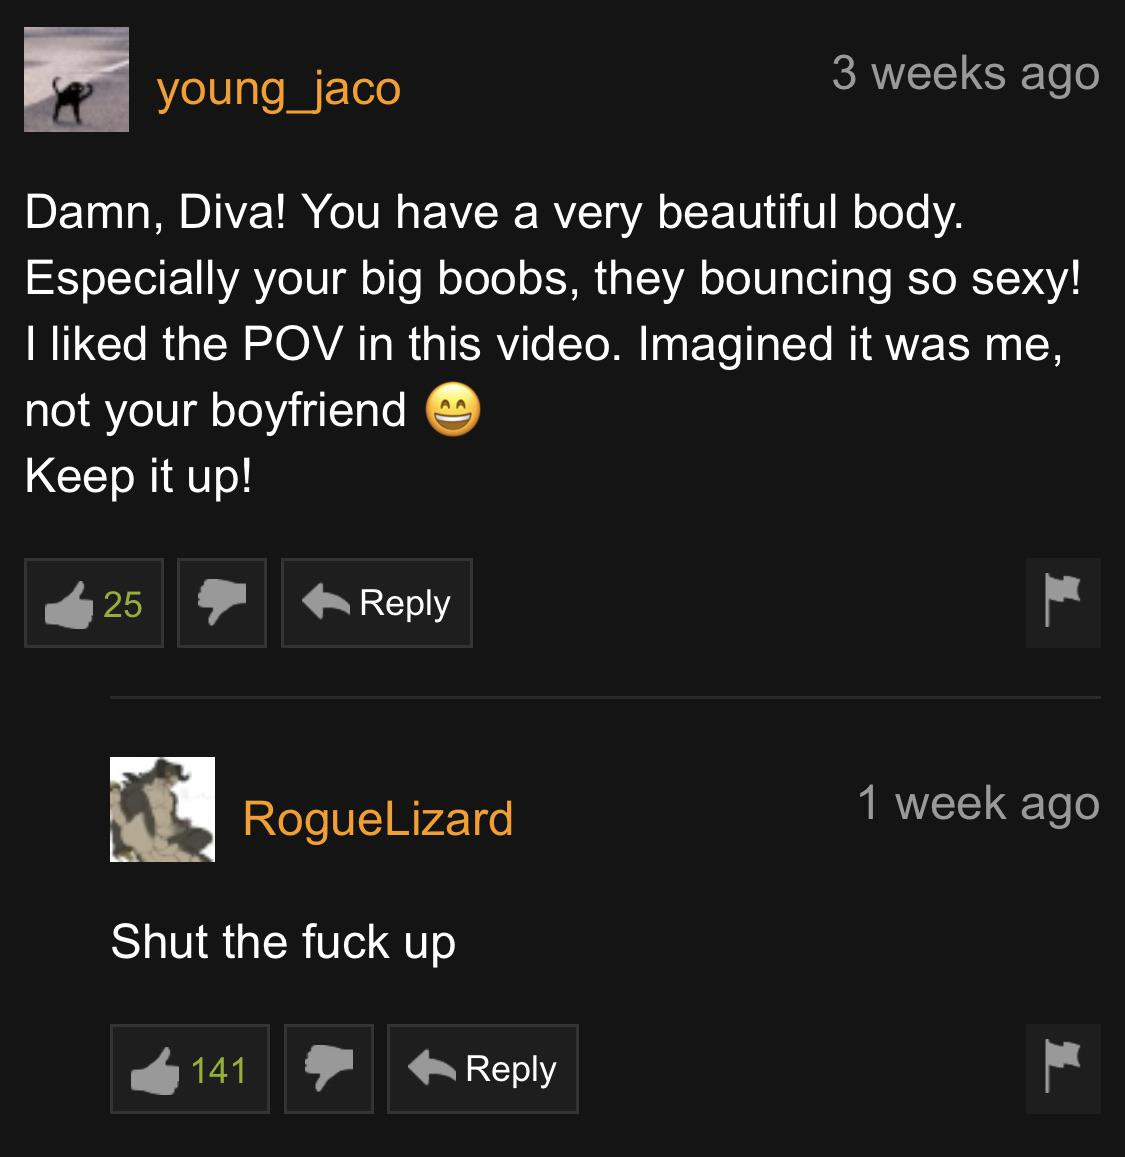 pornhub - screenshot - young_jaco 3 weeks ago Damn, Diva! You have a very beautiful body. Especially your big boobs, they bouncing so sexy! I d the Pov in this video. Imagined it was me, not your boyfriend Keep it up! 25 Rogue Lizard 1 week ago Shut the f